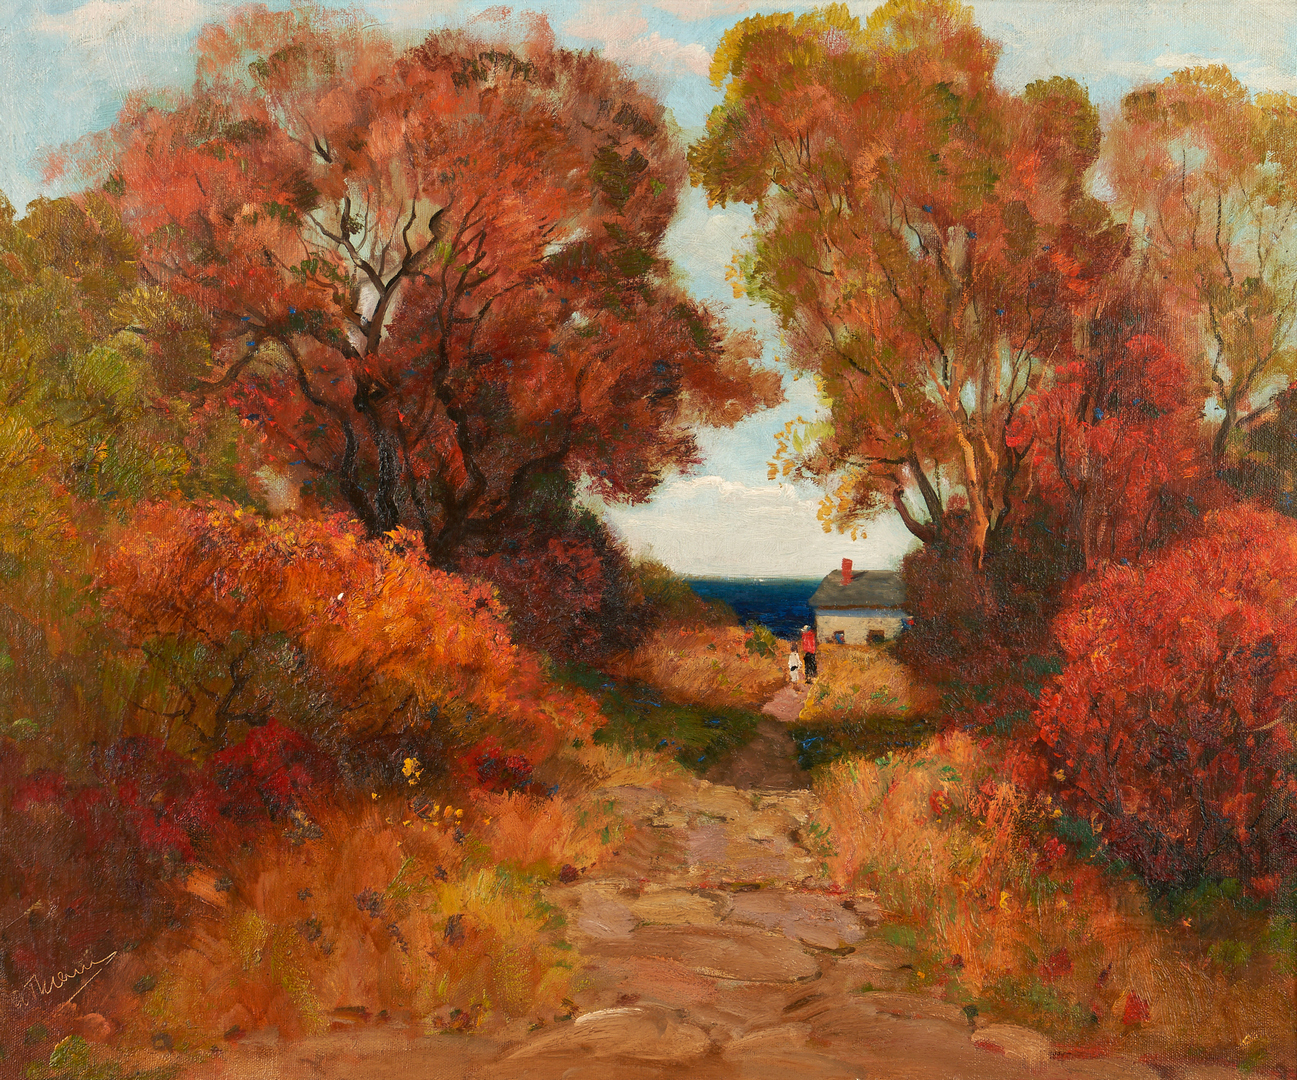 Lot 151: Anthony Thieme O/C Landscape Painting, Figures on a Country Road